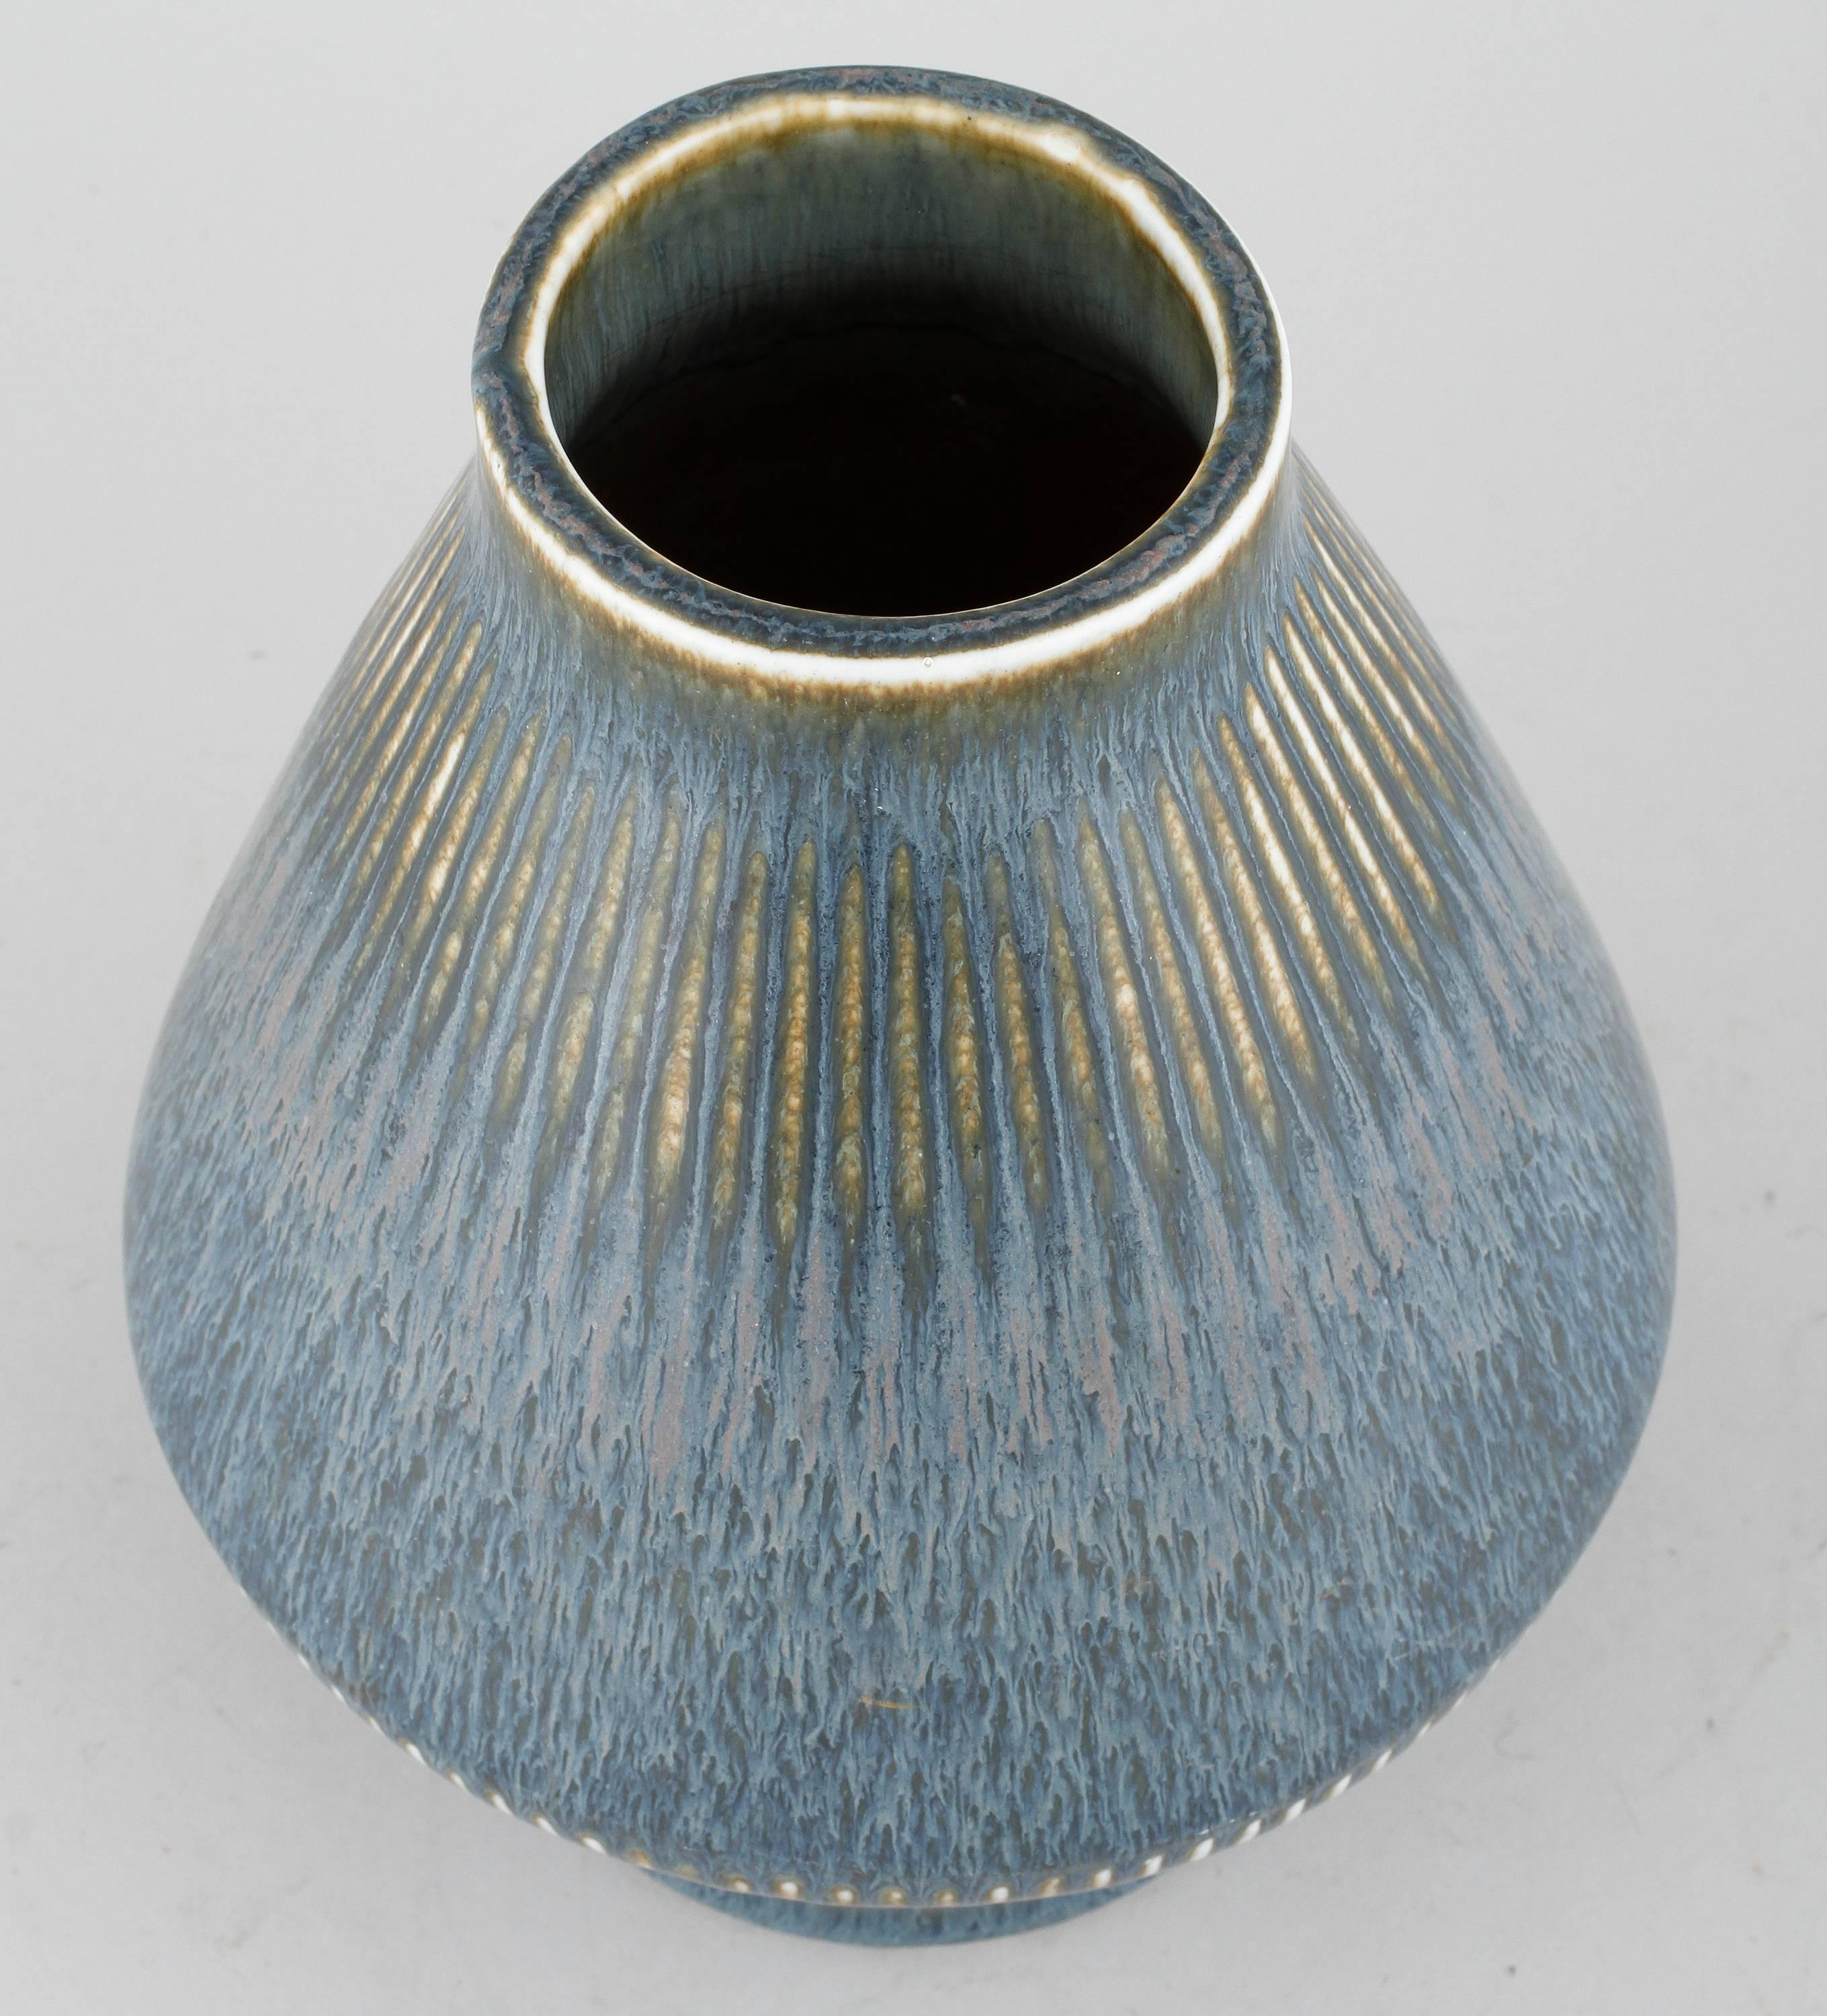 Beautiful vase created by Carl-Harry Stalhane for Rörstrand, signed under the base.
The glazed is a vibrant washed blue with traces of brown and ochre and a touch of white on the edges.
Very good condition without any chips, only regular wear due